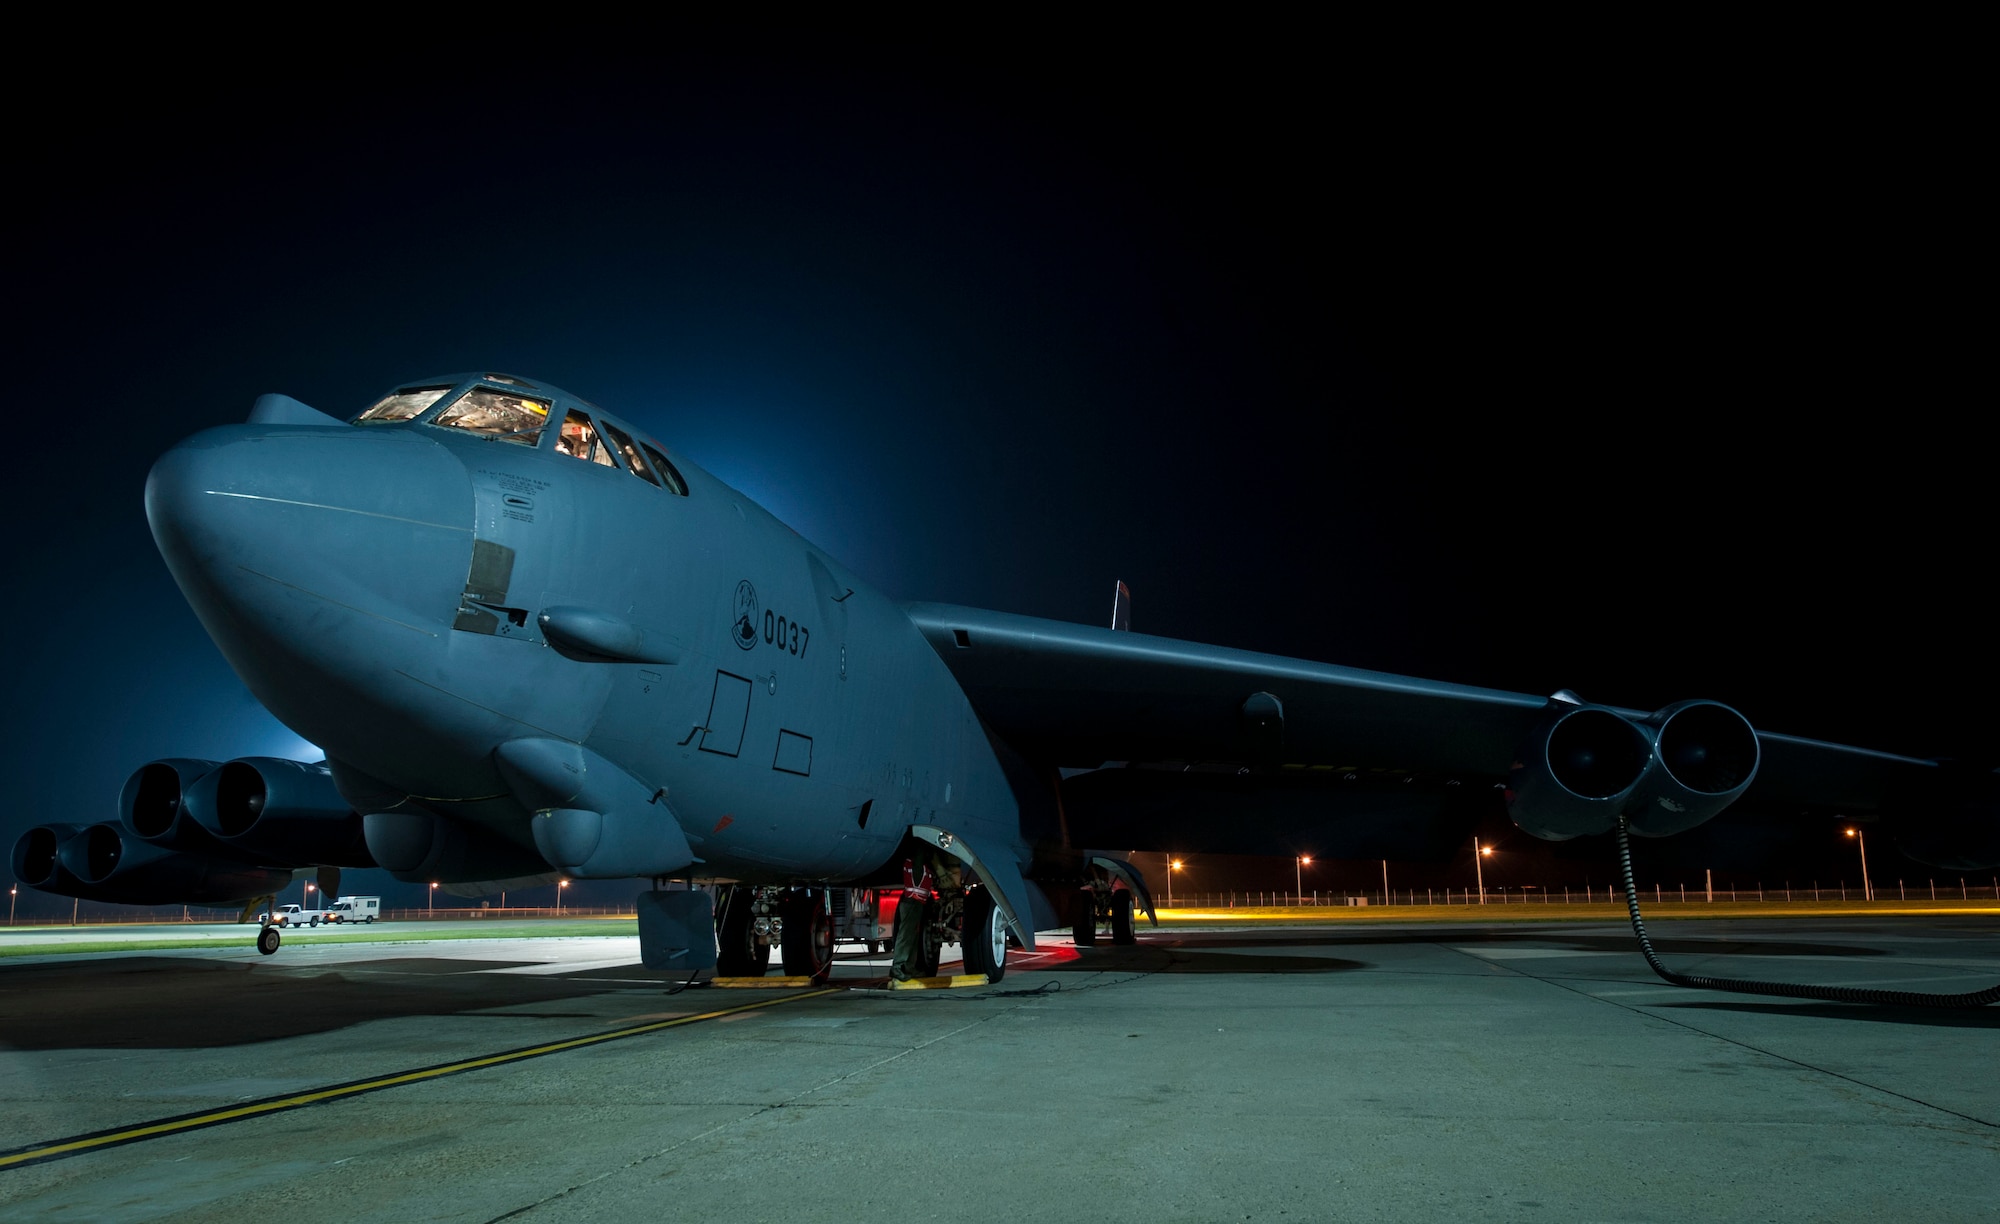 A B-52H Stratofortress sits on the flight line at Minot Air Force Base,
N.D., July 9, 2015. Two crews took flight in the early hours of the morning
to participate in a 16-hour mission in support of an air show in Rio Negro,
Colombia. (U.S. Air Force photo/Senior Airman Stephanie Morris)

